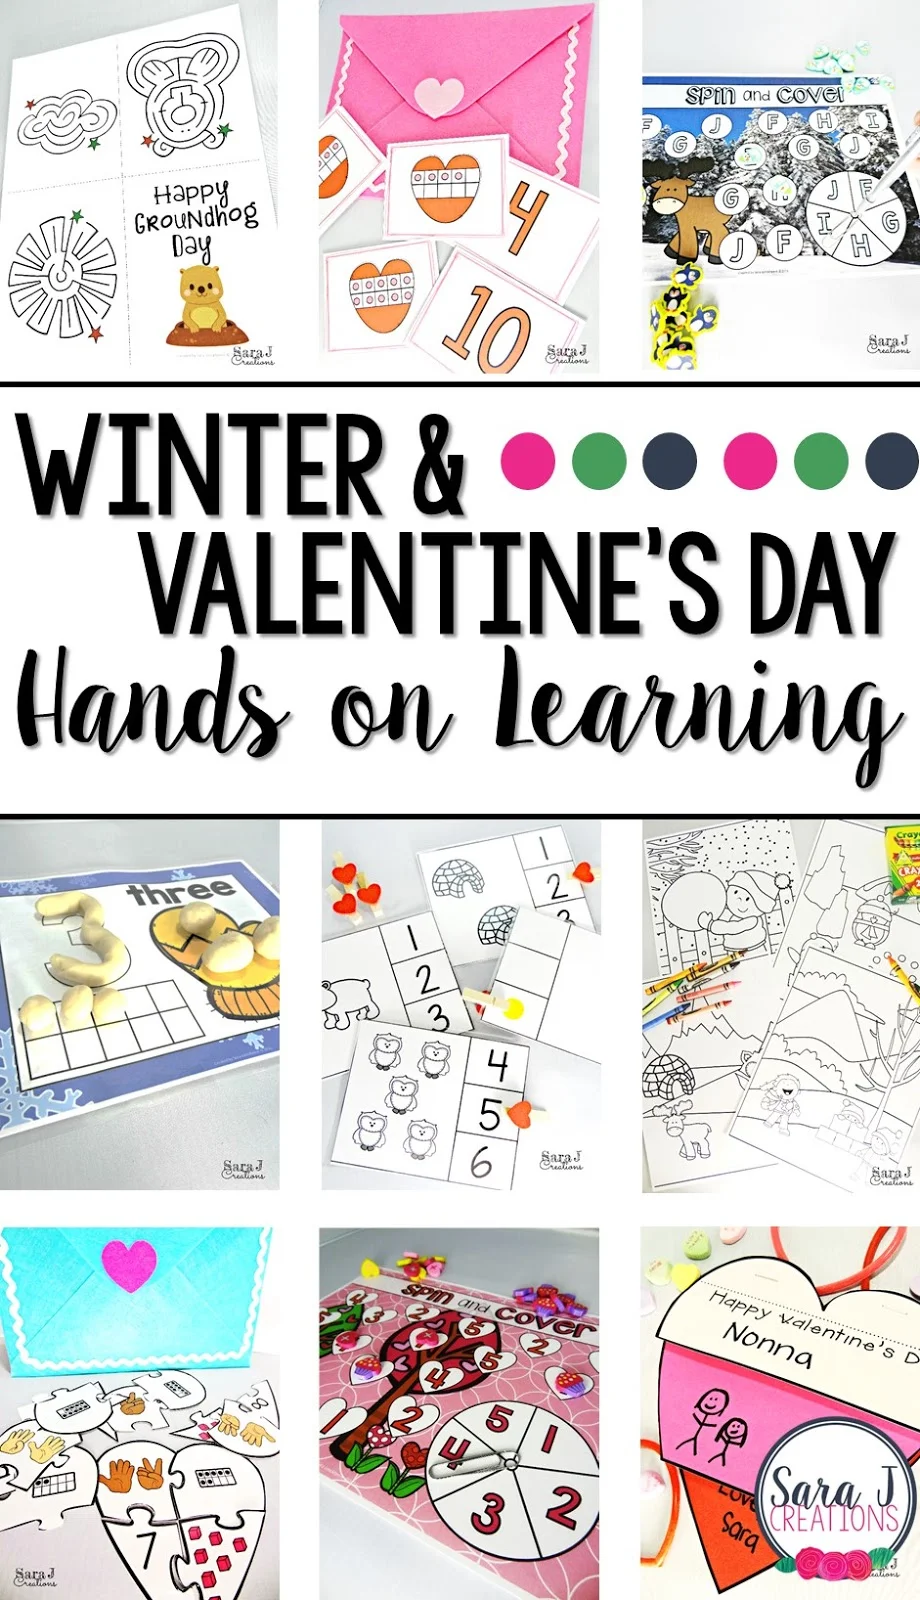 Winter activities and games for kids!  Includes winter theme and Valentine's Day printable activities.